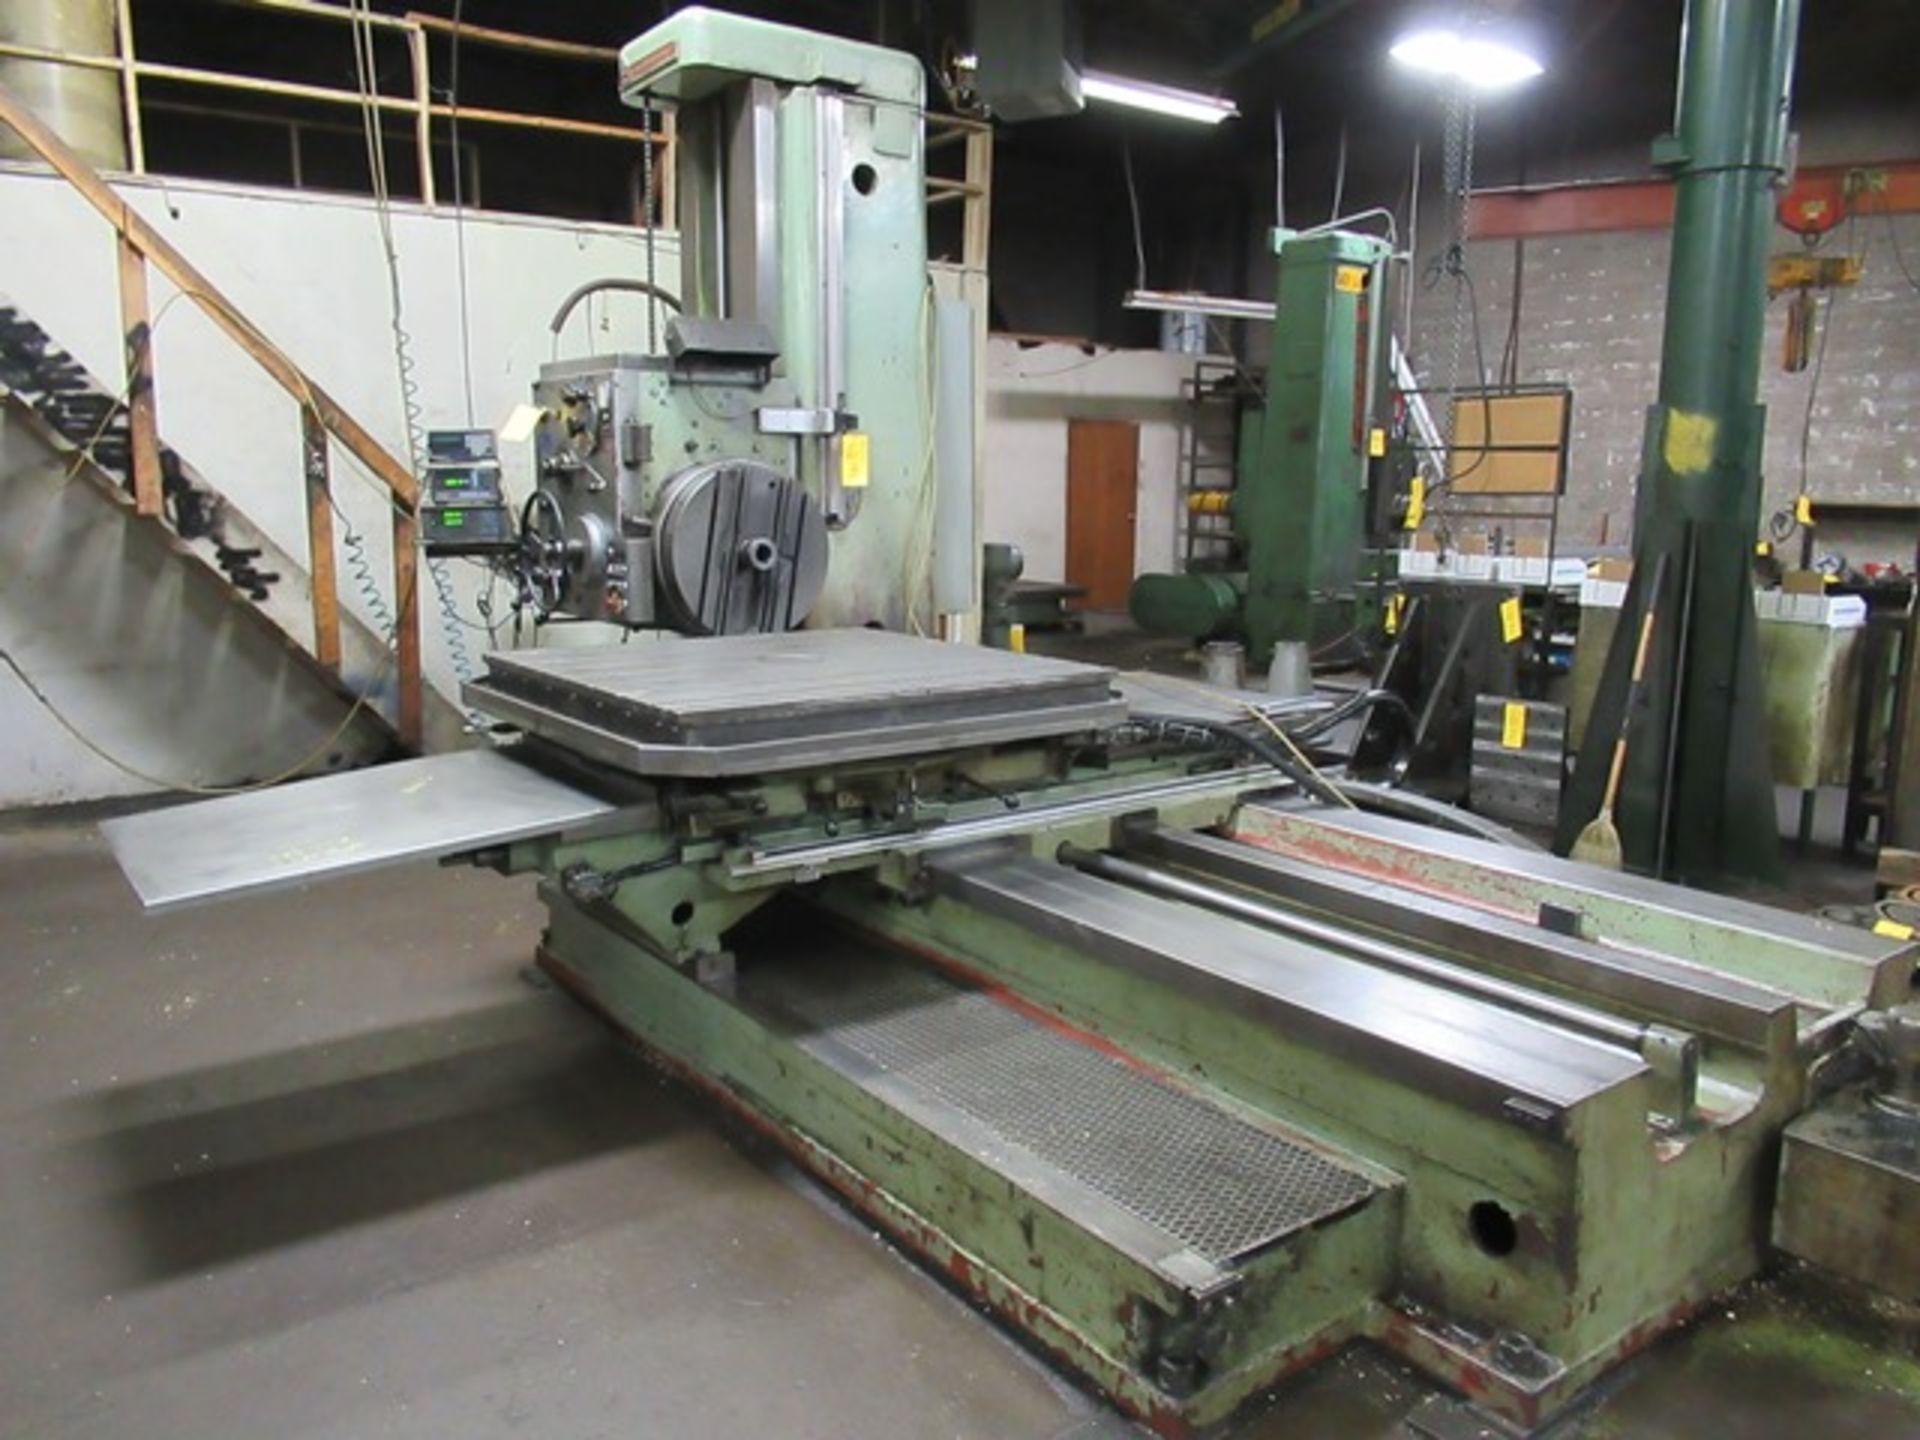 TOS W100A 49"X49" POWER ROTARY TABLE, TRAVELS X-63", Y-44", Z-49" HORIZONTAL BORING MILL